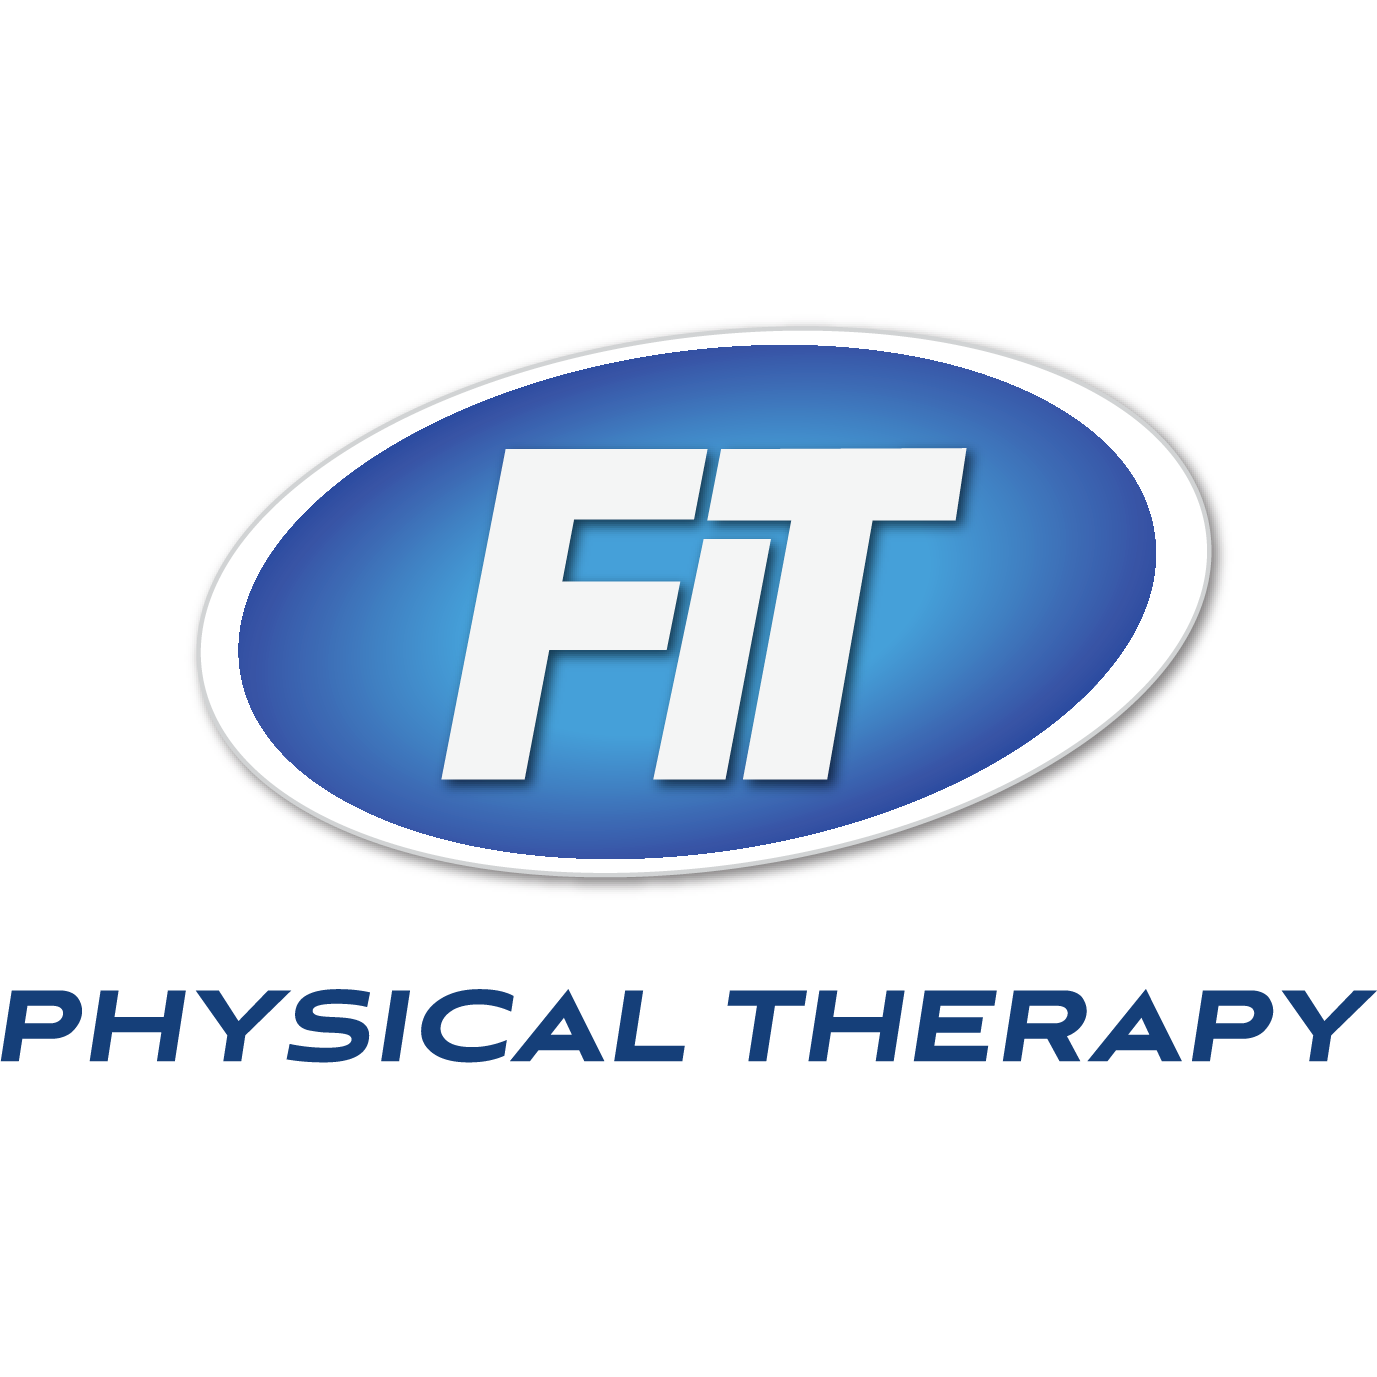 Fit Physical Therapy - Saint George, UT